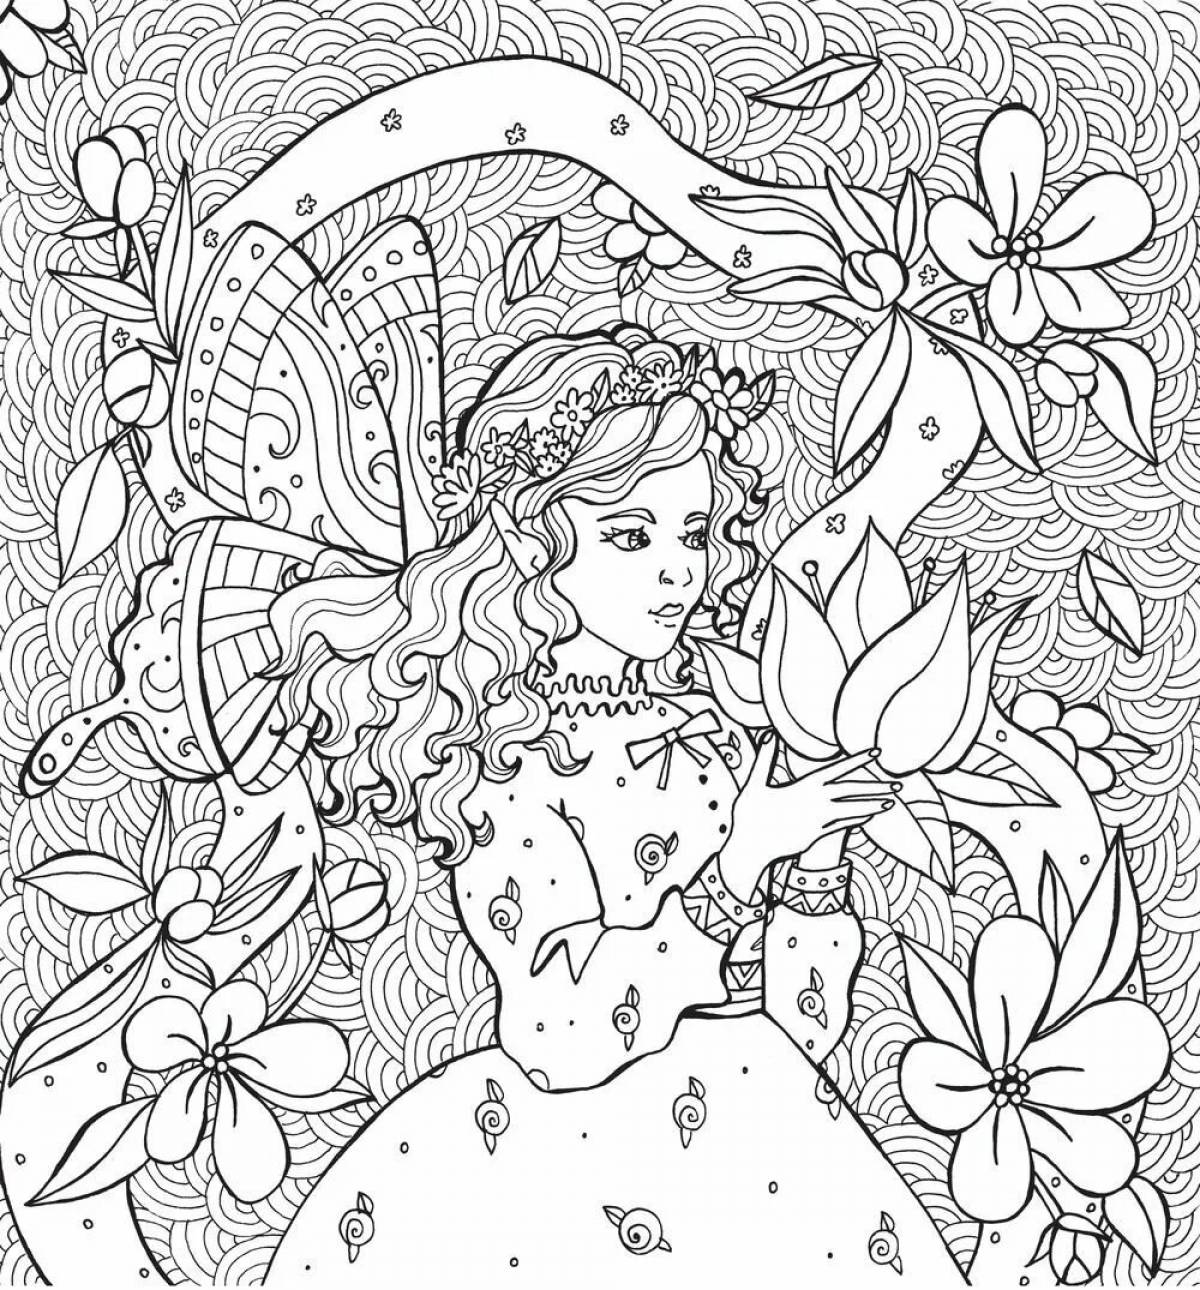 Blooming coloring of the magical world of fairies